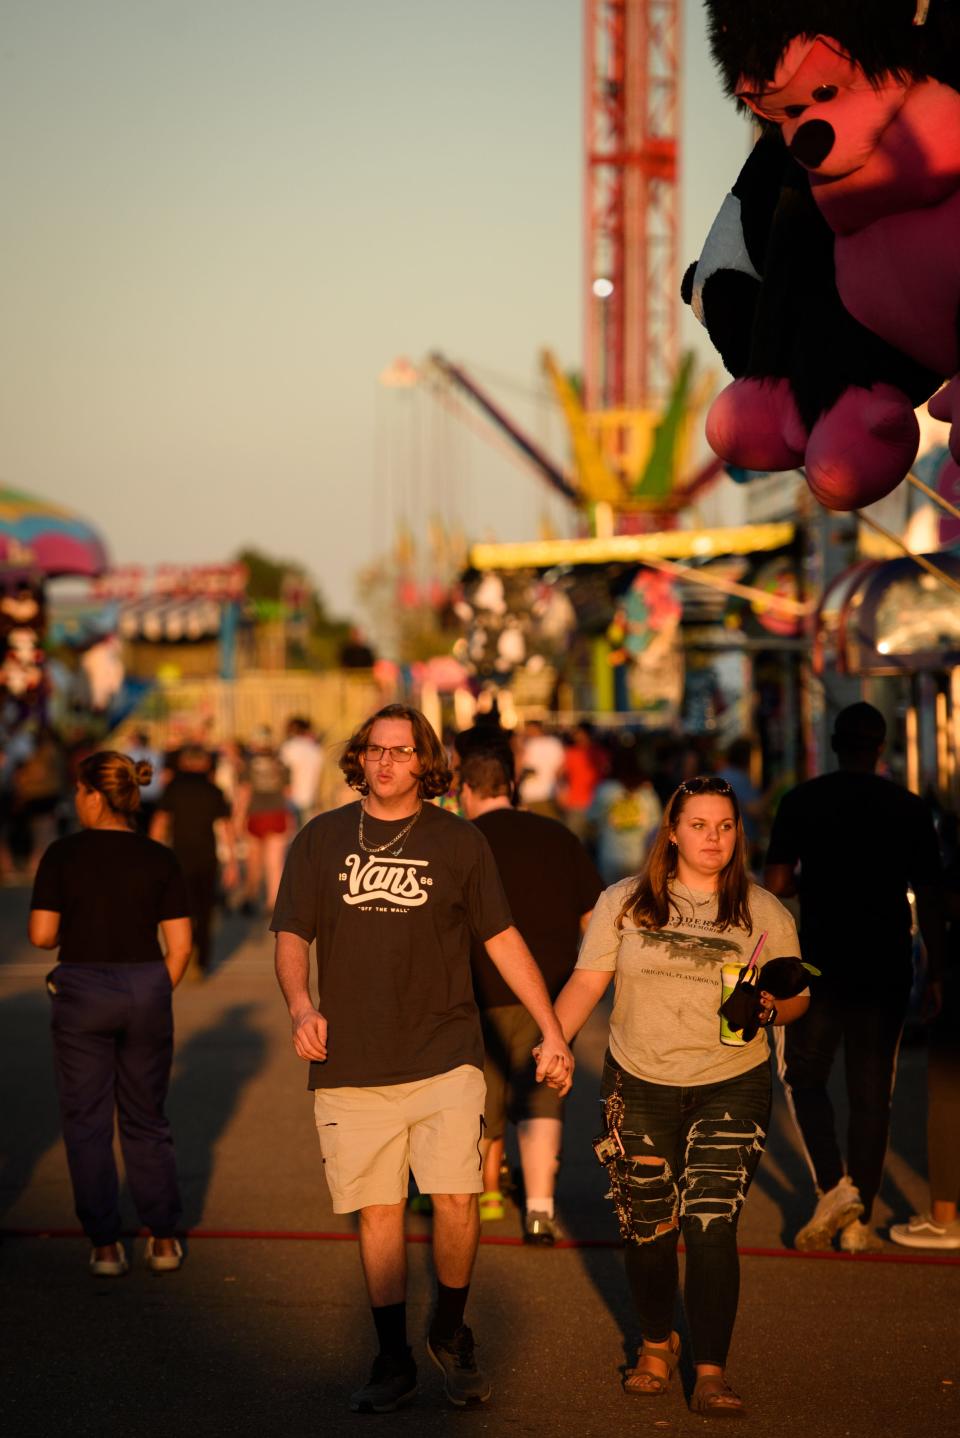 Opening day of the Cumberland County Fair on Friday, Sept. 3, 2021.